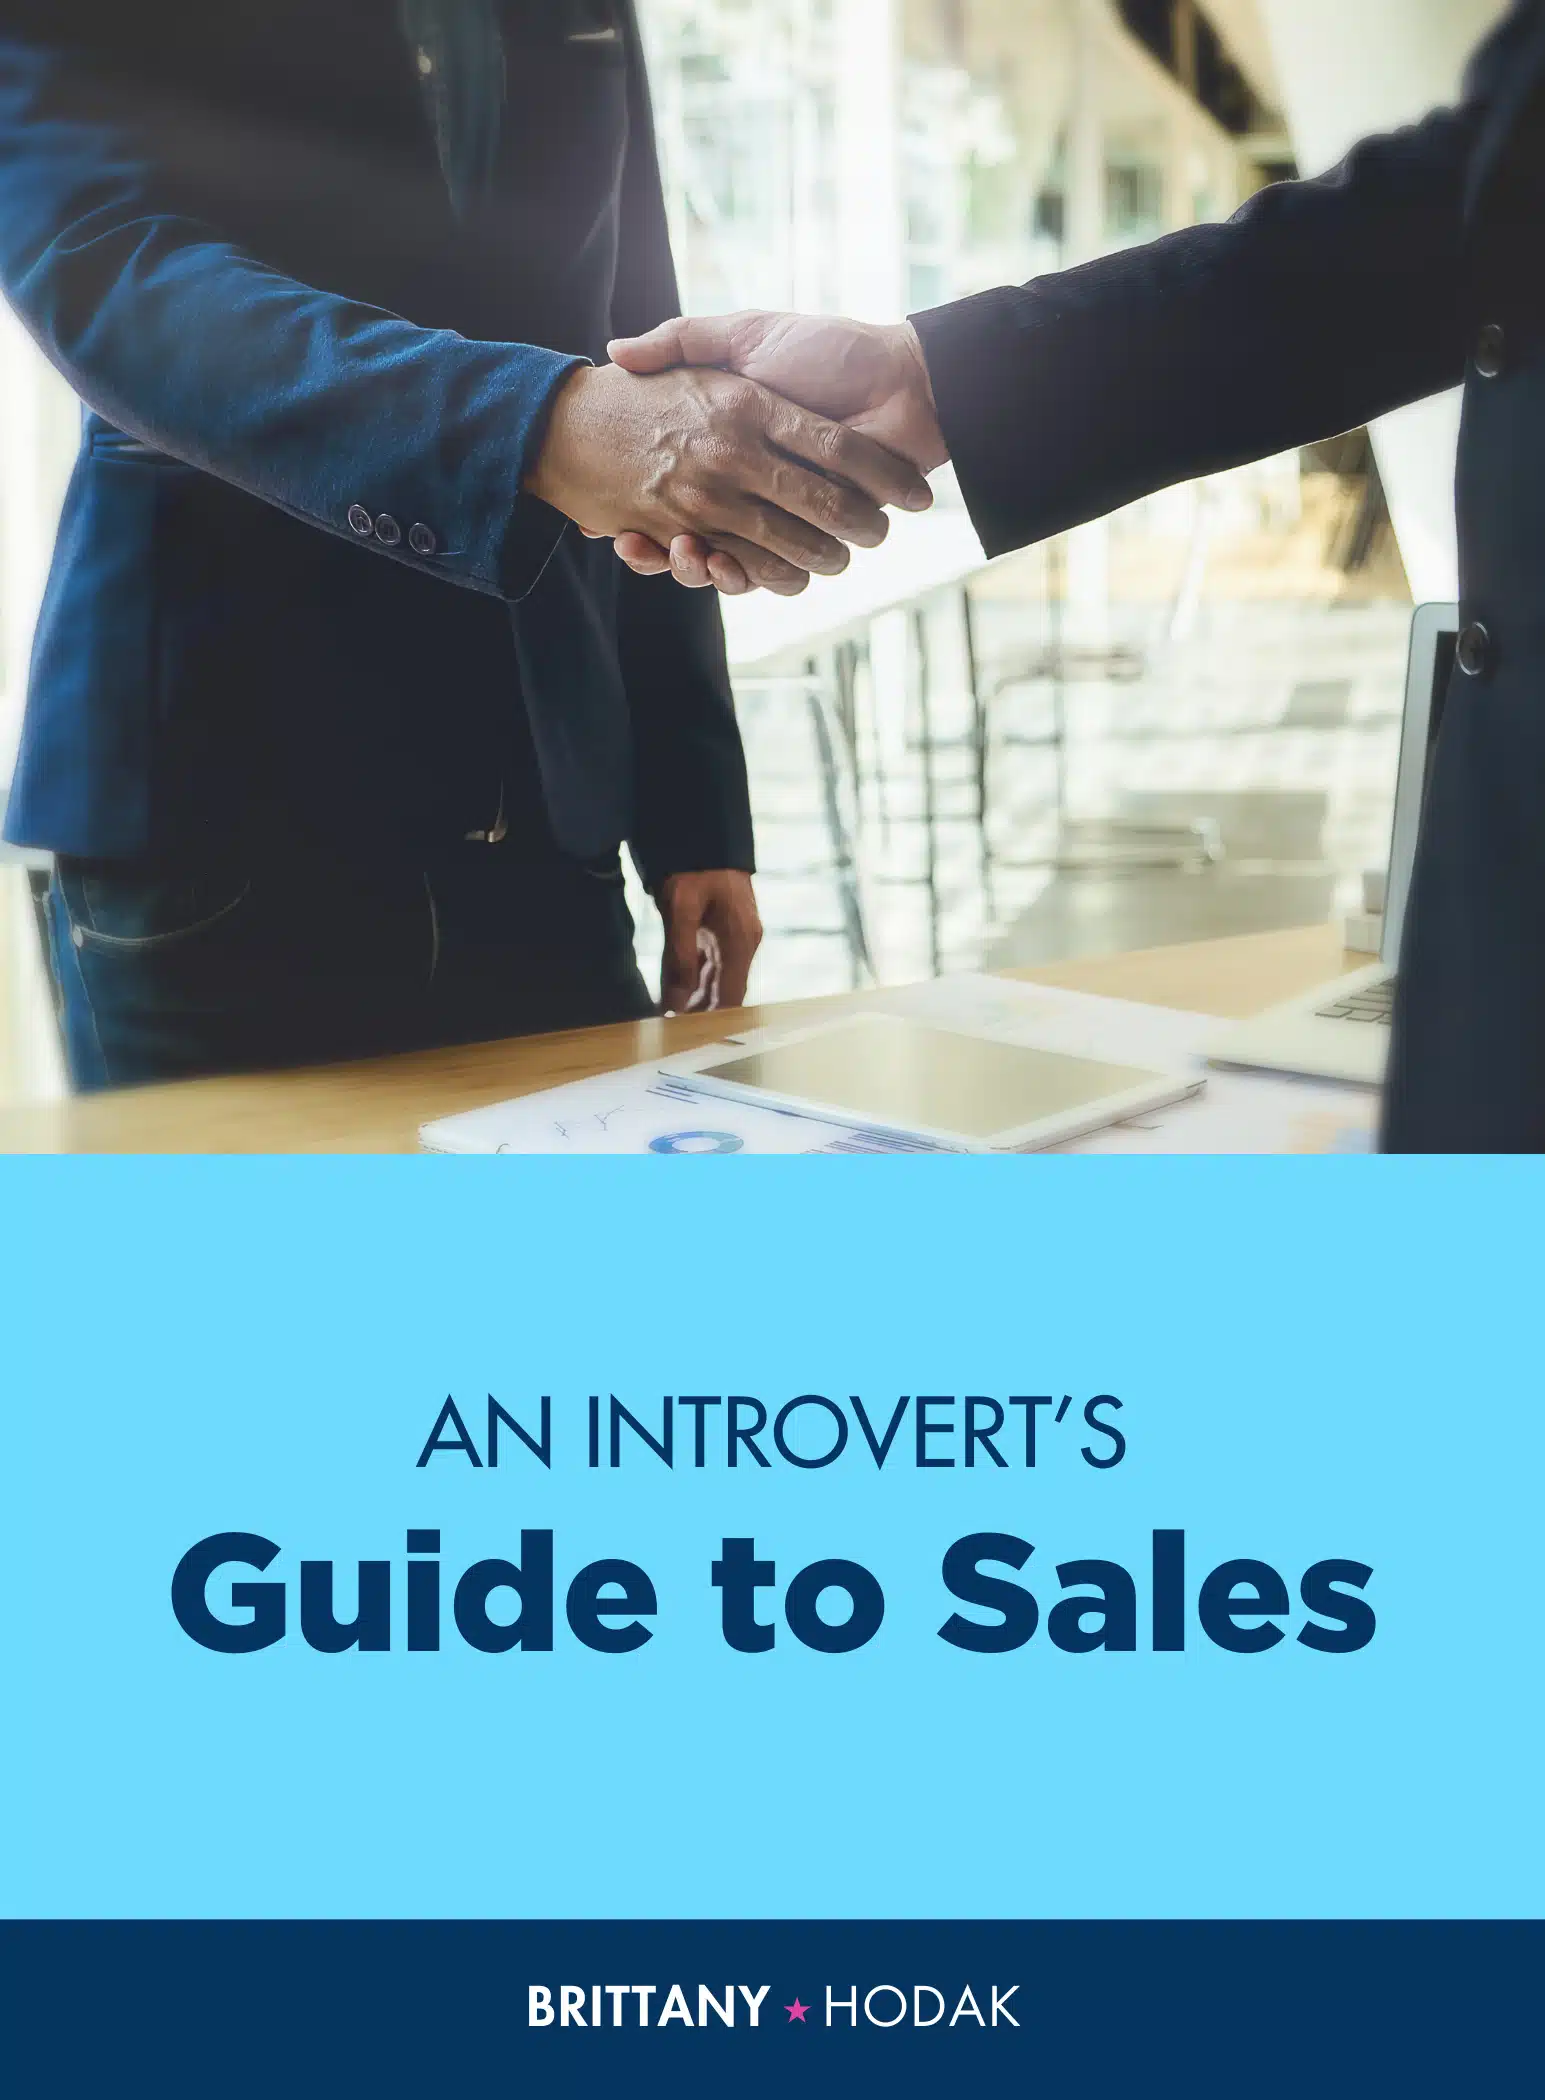 An Introvert's Guide to Sales - Brittany Hodak